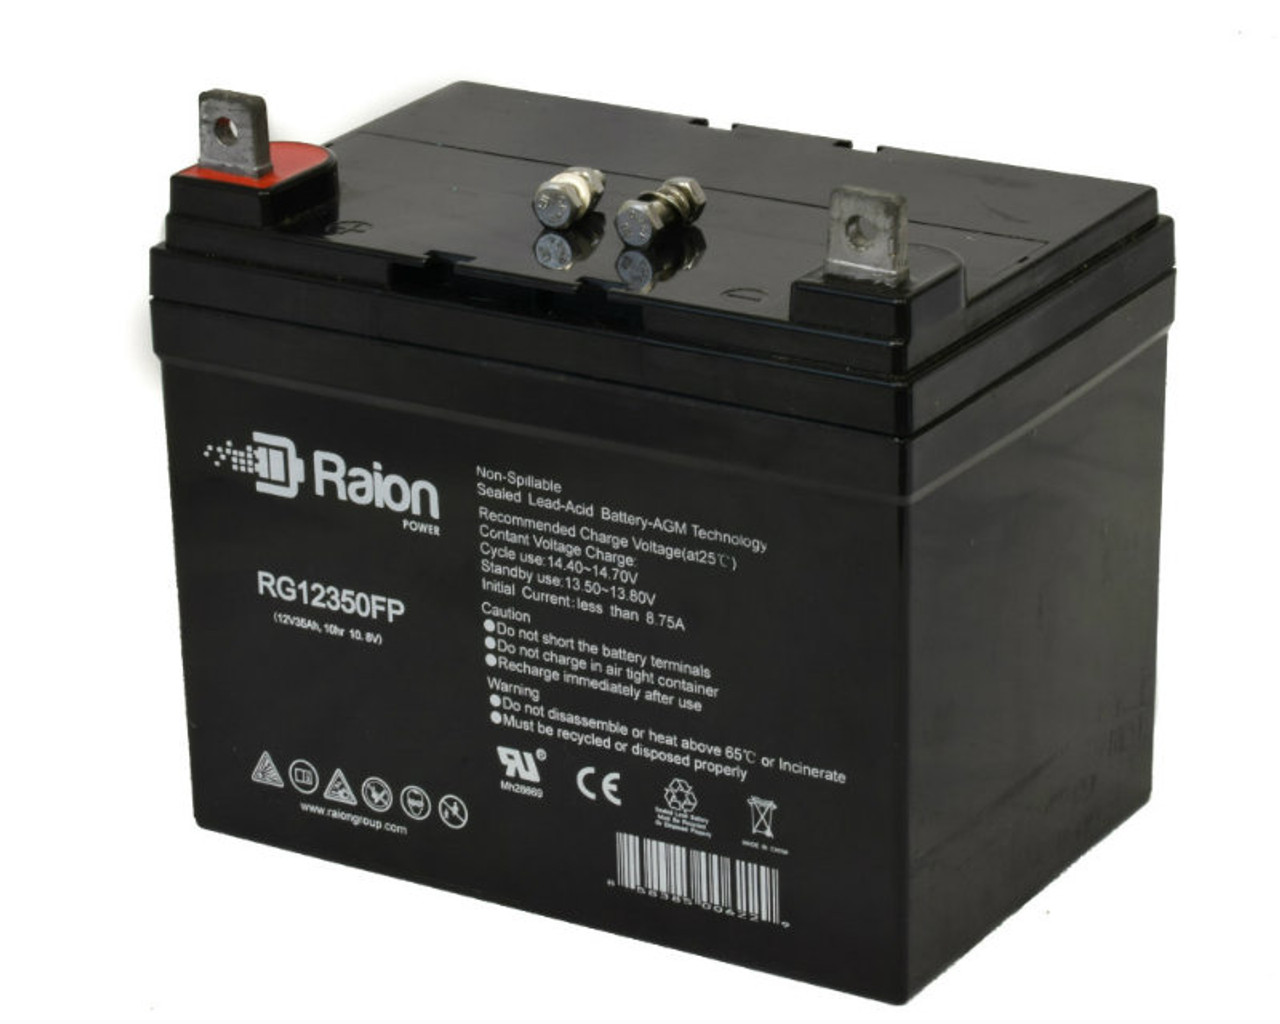 Raion Power Replacement 12V 35Ah RG12350FP Battery for Turfmaster 12/36